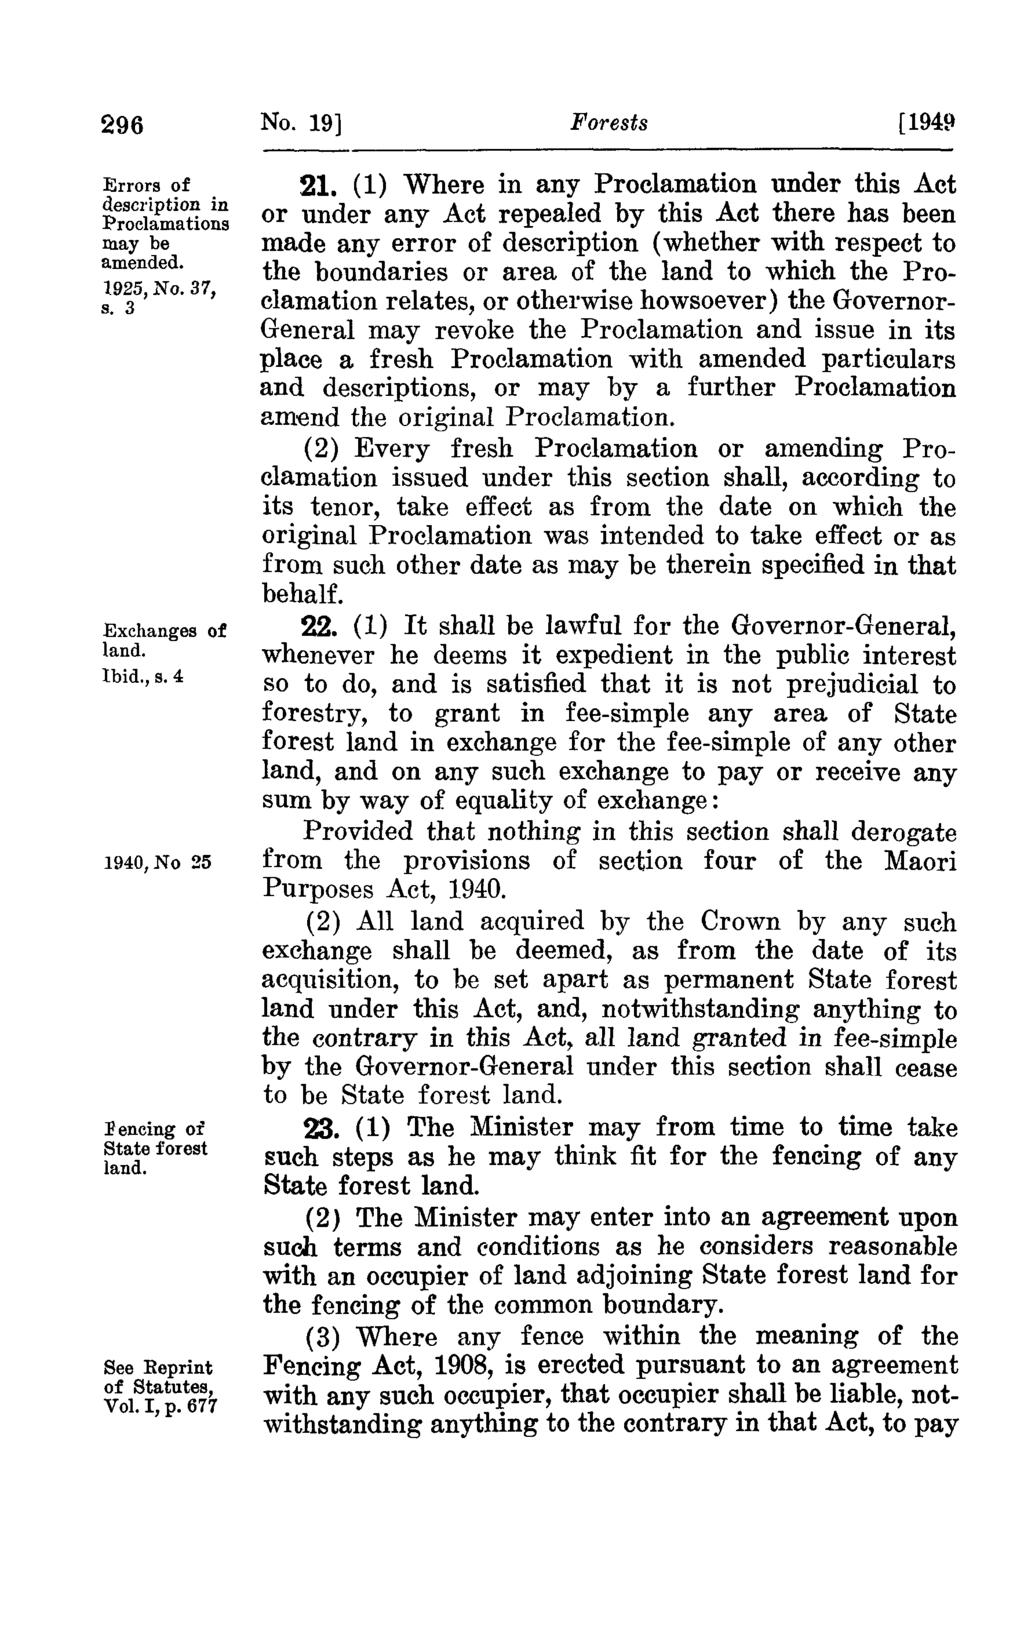 296 Errors of description in Proclamations may be amended. 1925, No. 37, s. 3 Exchanges of land. Ibid., s. 4 1940,No 25 Fencing or State forest land. See Reprint of Statutes, Vol. I, p. 677 No.